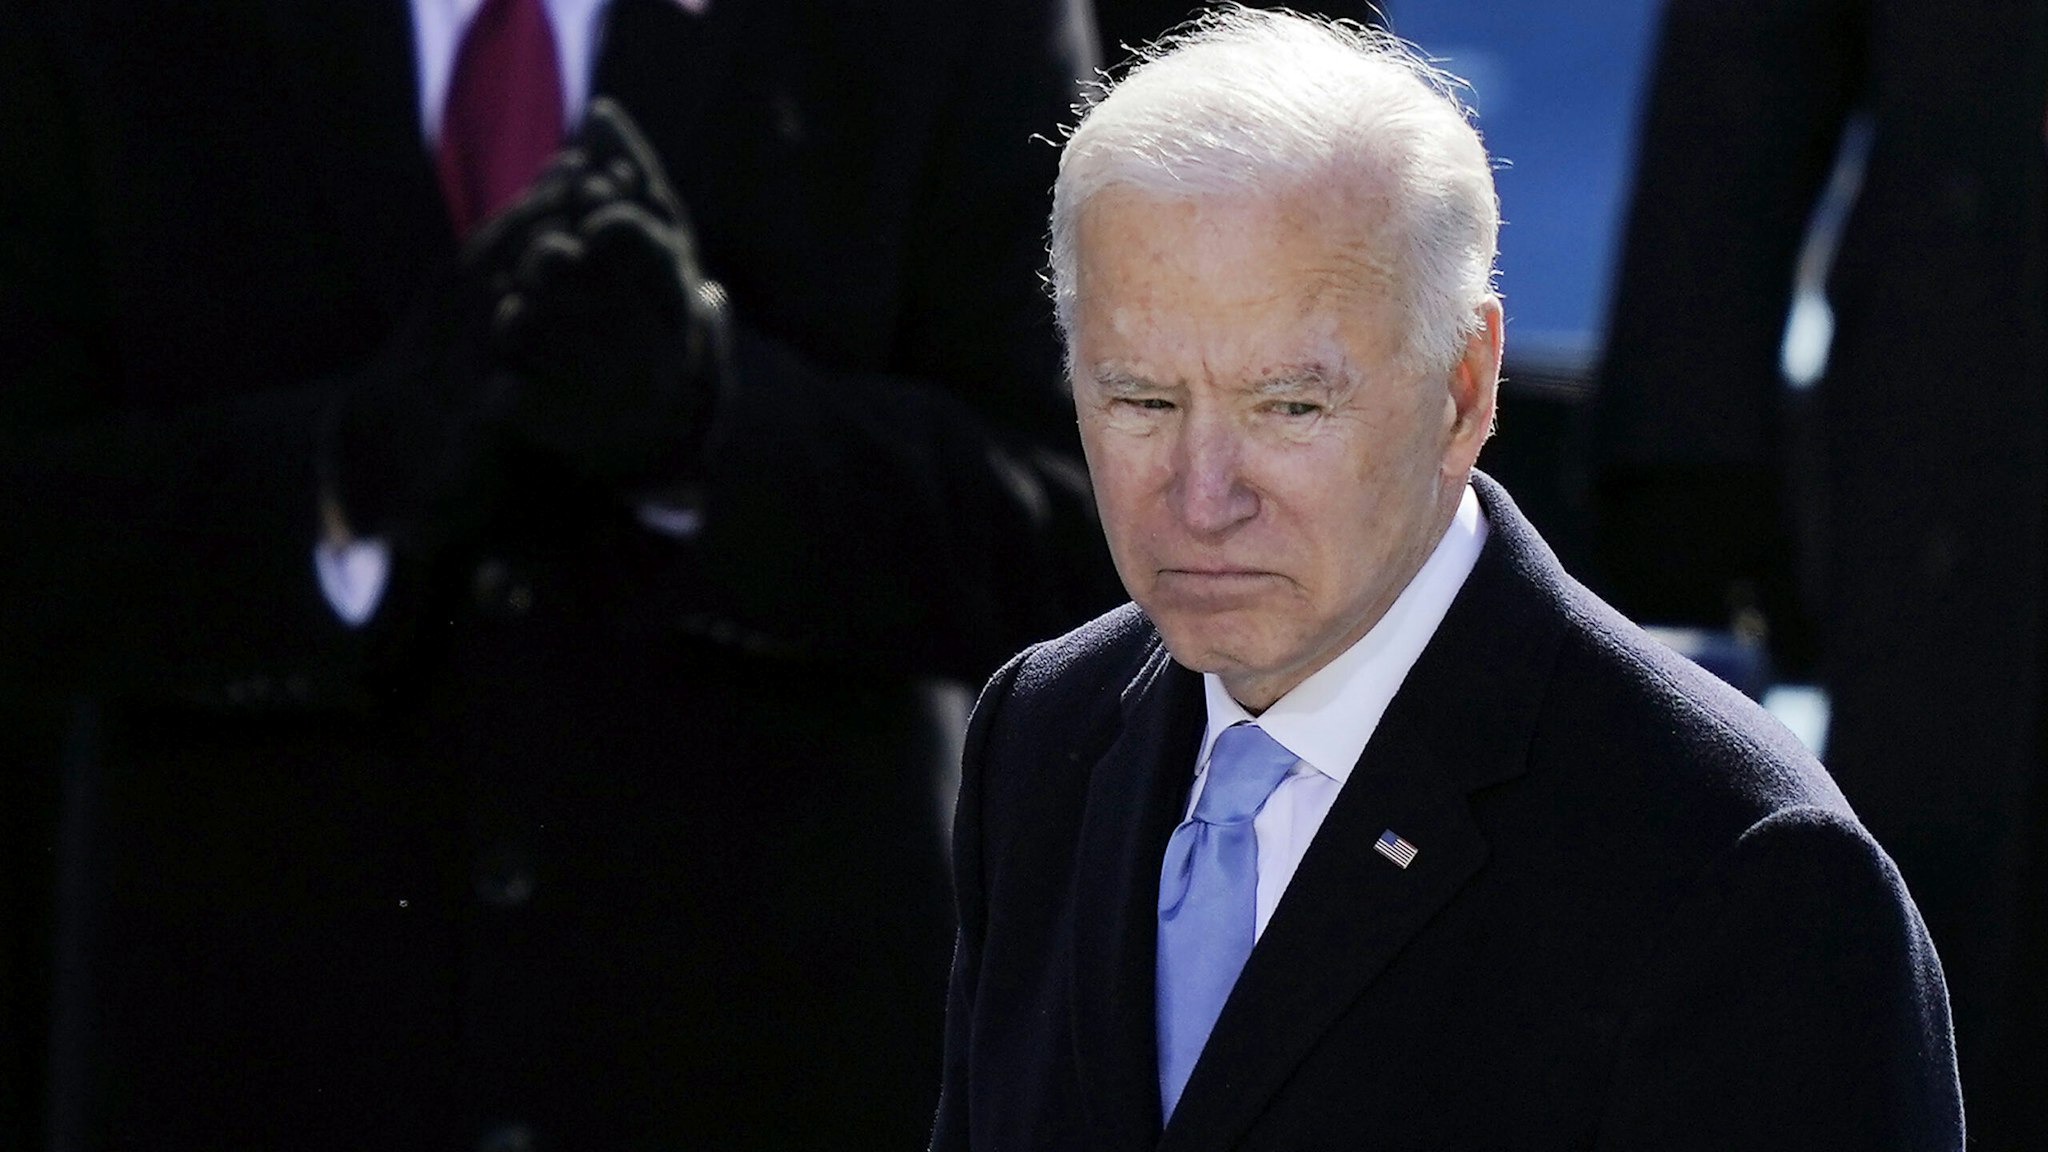 WASHINGTON, DC - JANUARY 20: U.S. President Joe Biden pauses after delivering his inaugural address on the West Front of the U.S. Capitol on January 20, 2021 in Washington, DC. During today's inauguration ceremony Joe Biden becomes the 46th president of the United States.